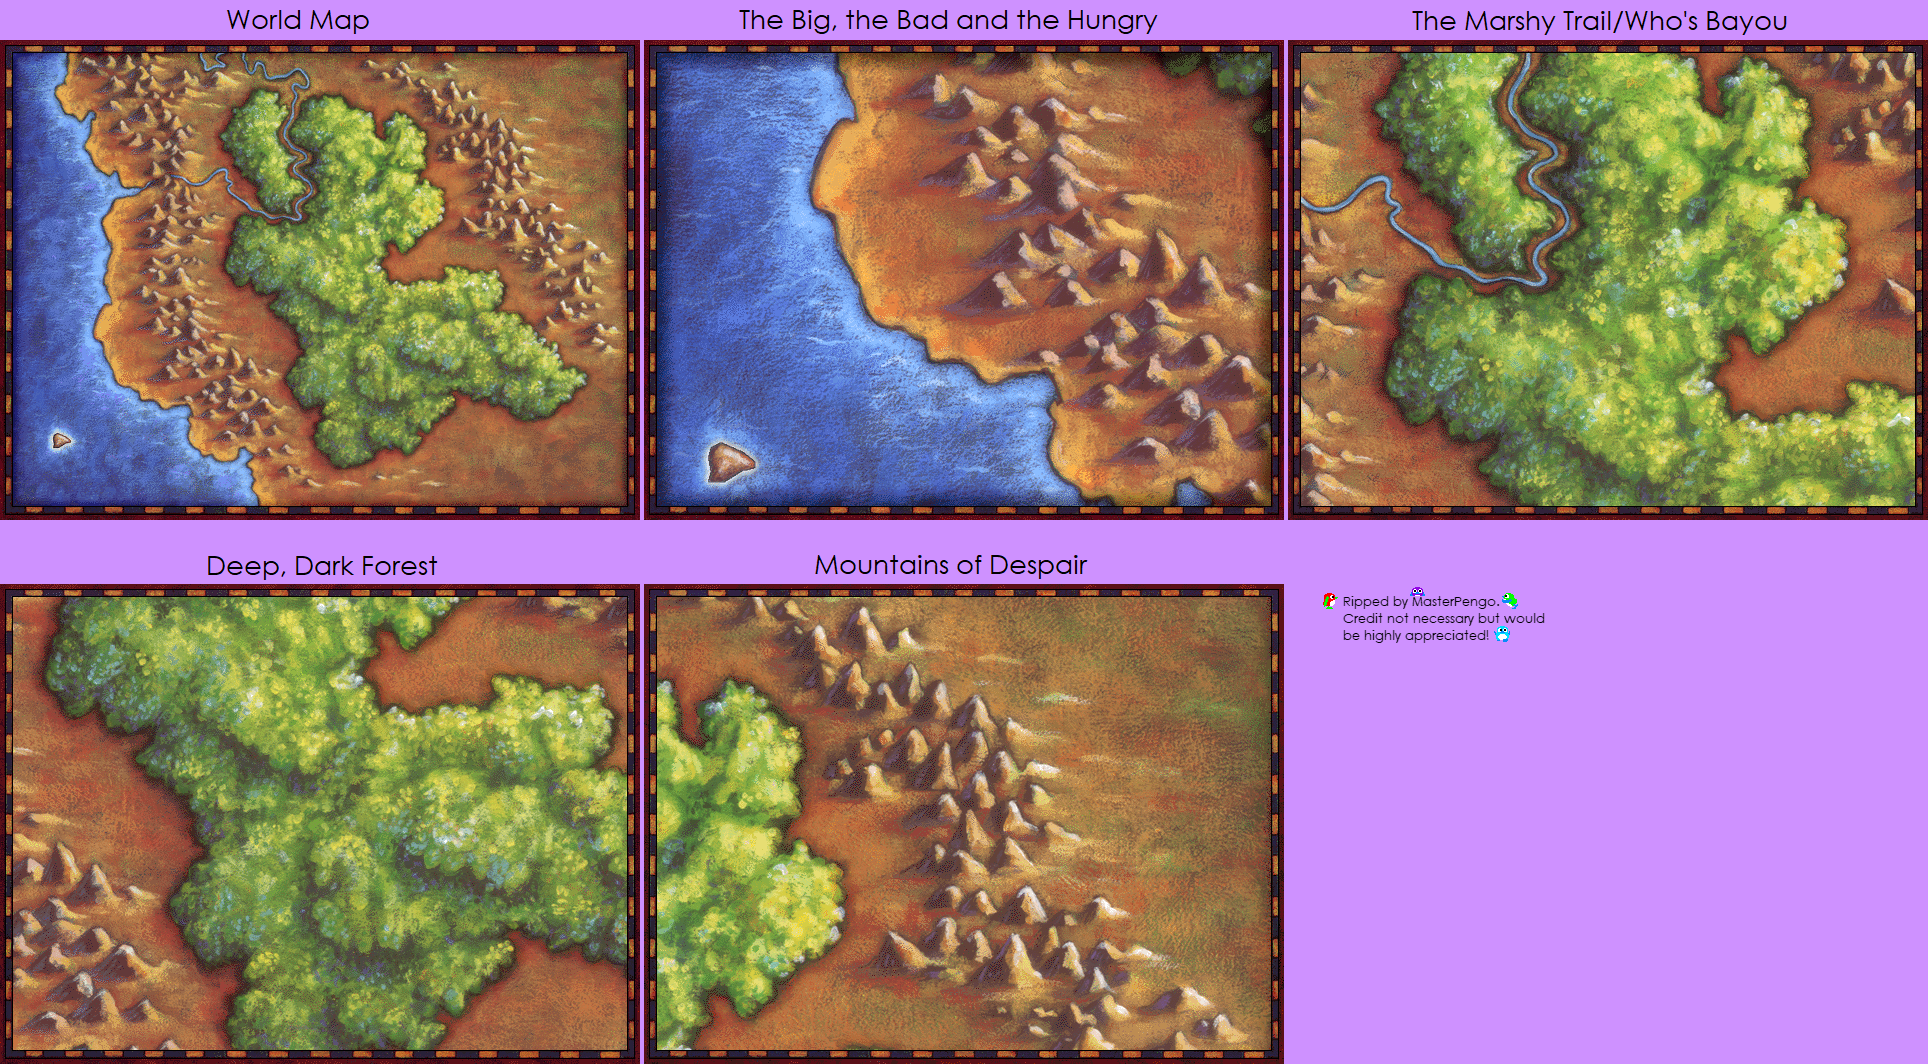 Logical Journey of the Zoombinis - Maps